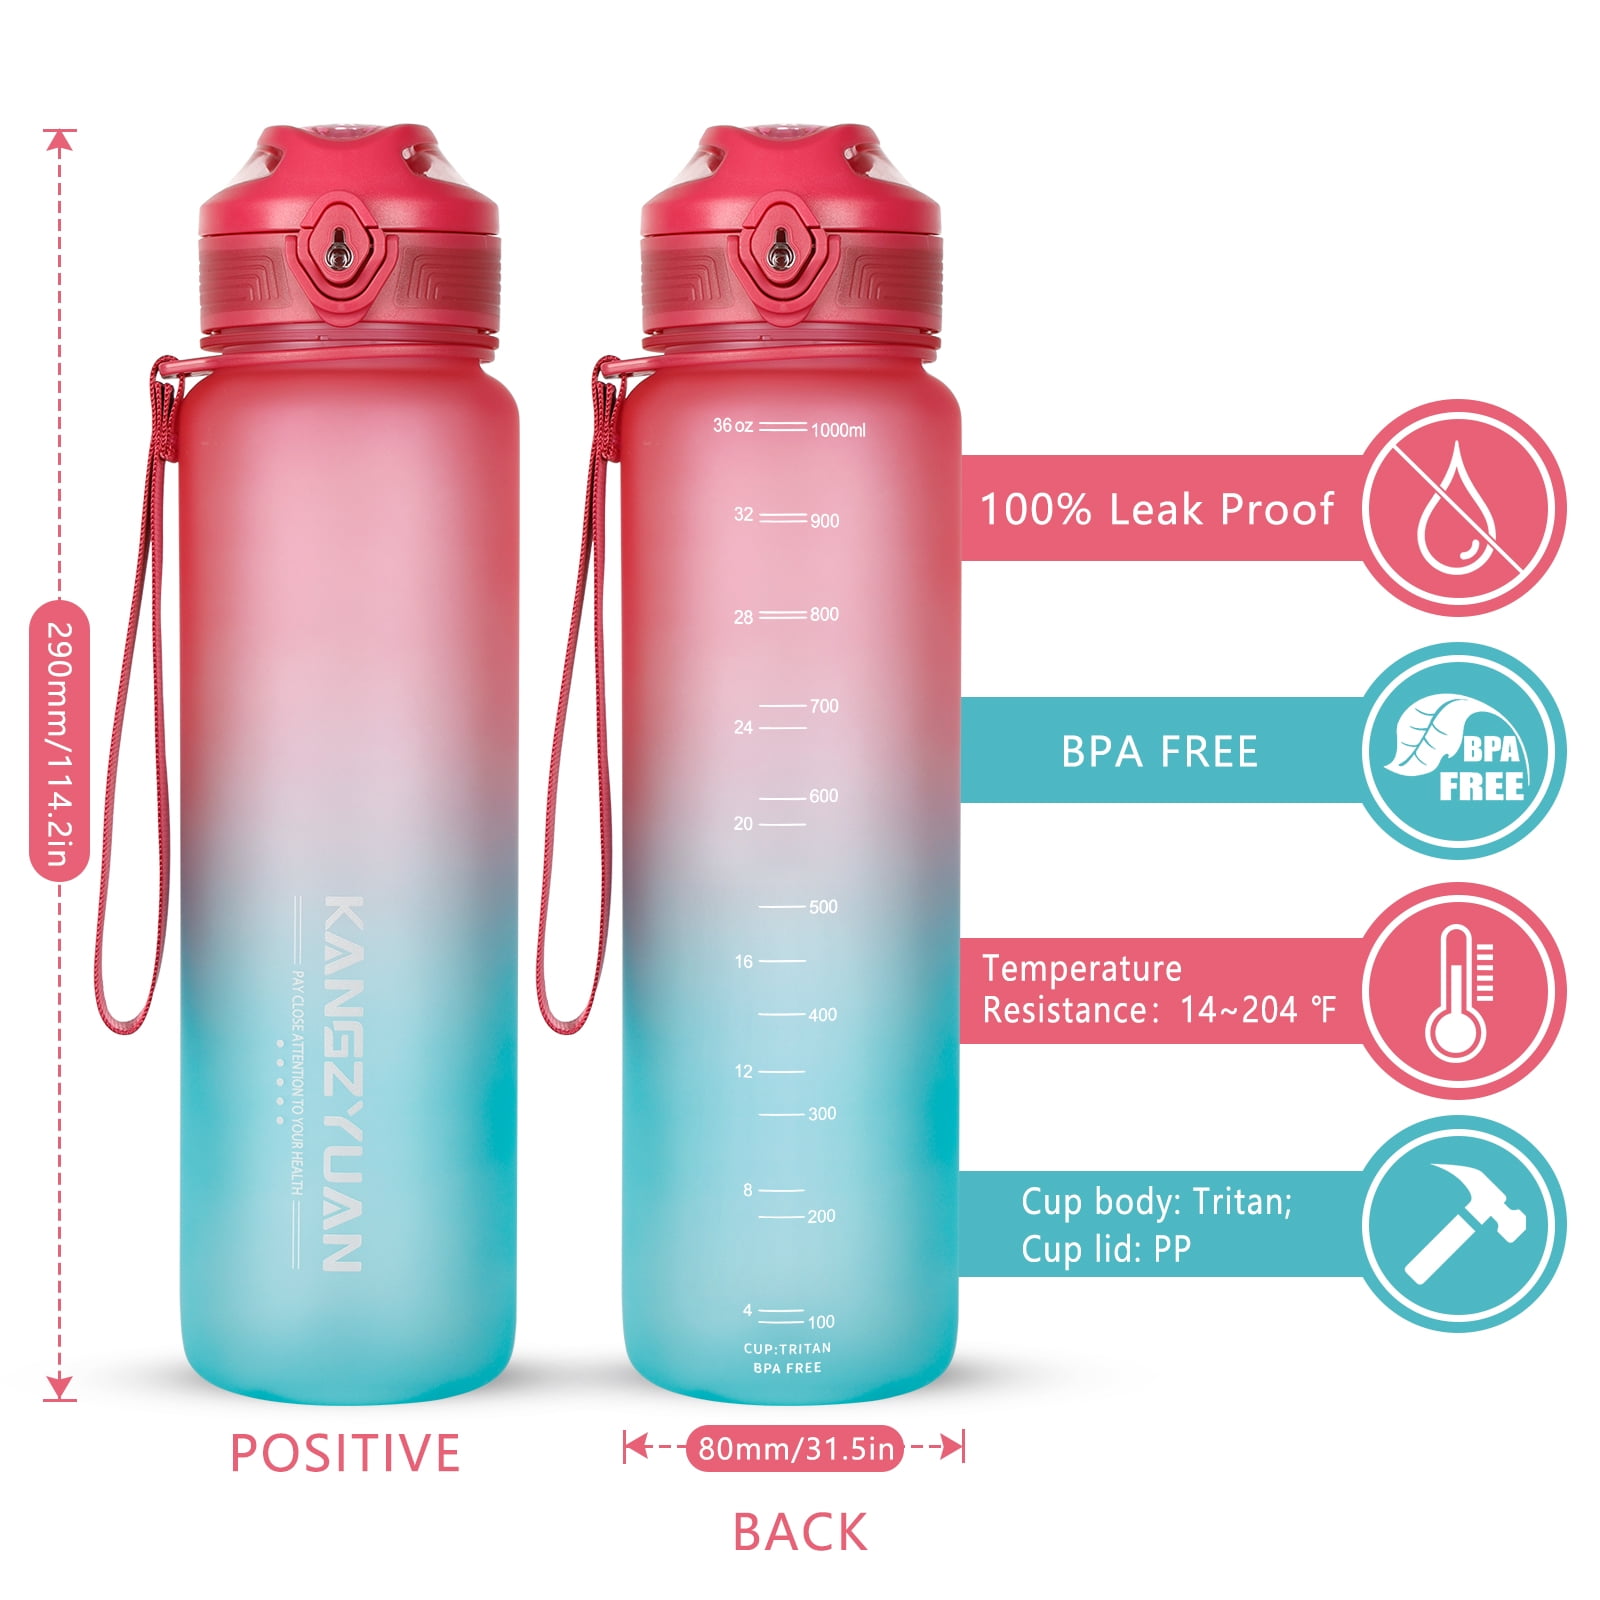 3 Water bottle set (Blue Yellow Pink) - BPA free 2ltr 64oz- water bottles  with straws, sports water …See more 3 Water bottle set (Blue Yellow Pink) 